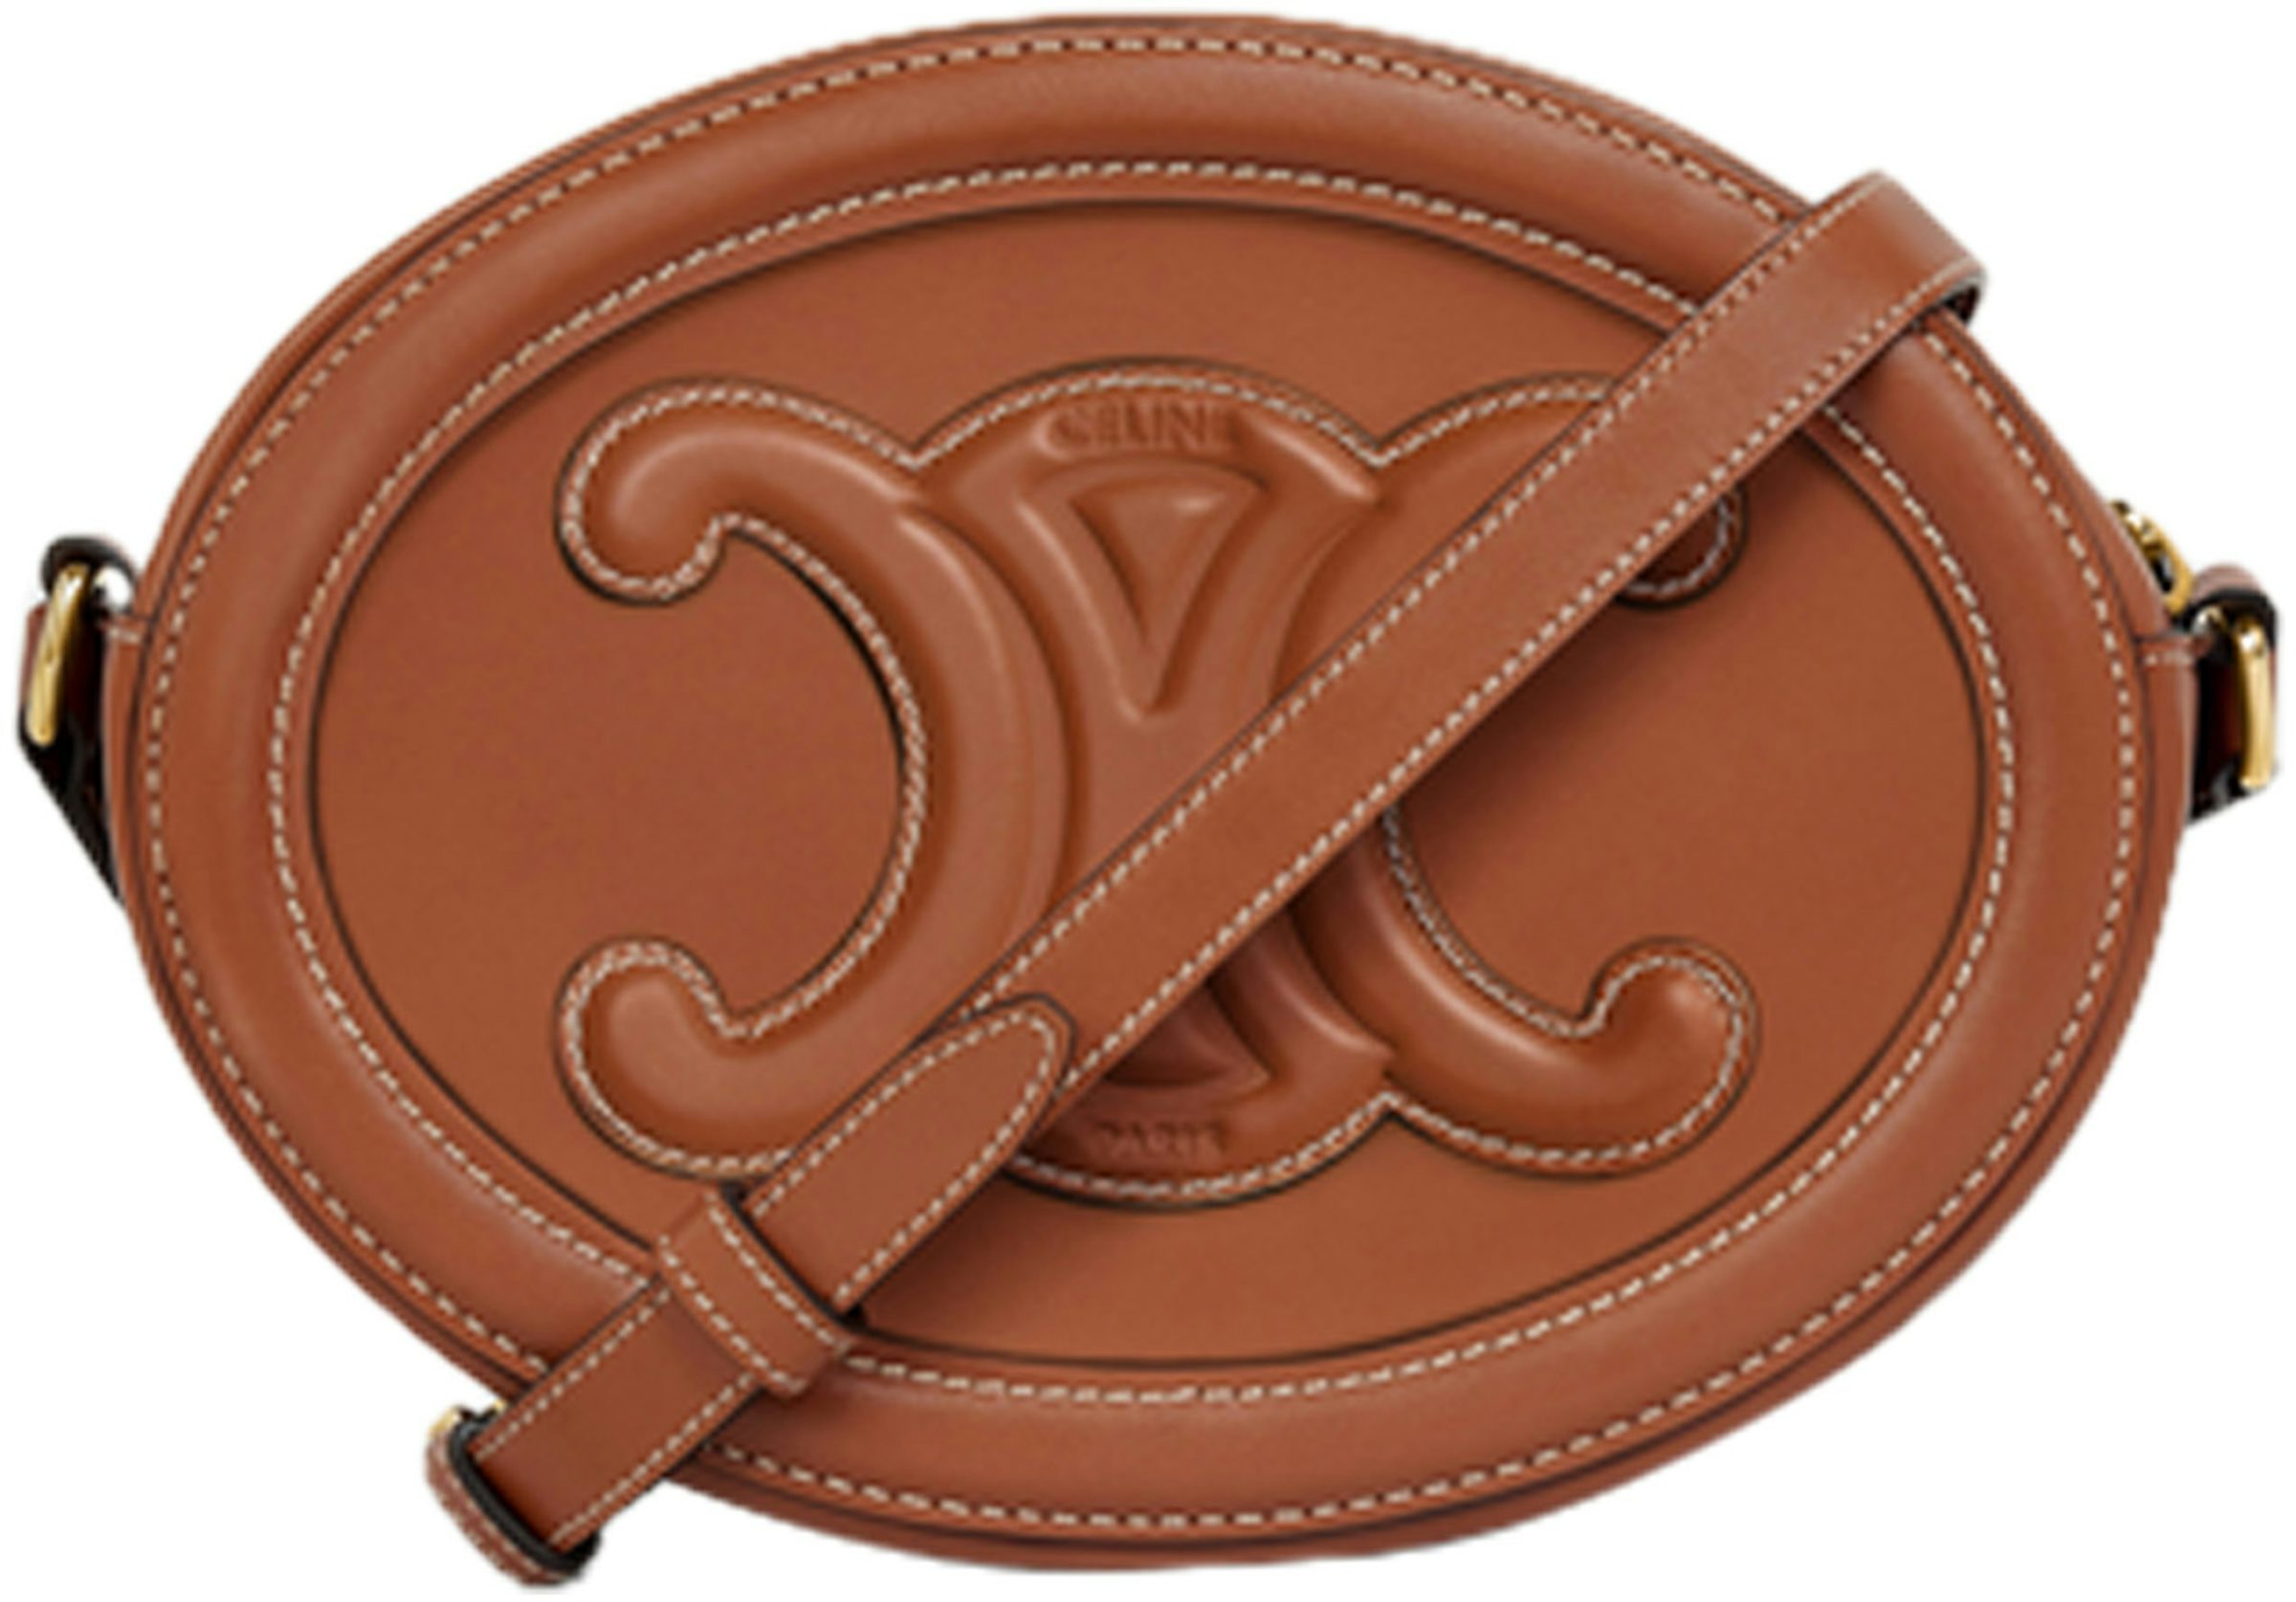 OVAL BAG CUIR TRIOMPHE IN TRIOMPHE CANVAS AND CALFSKIN - TAN